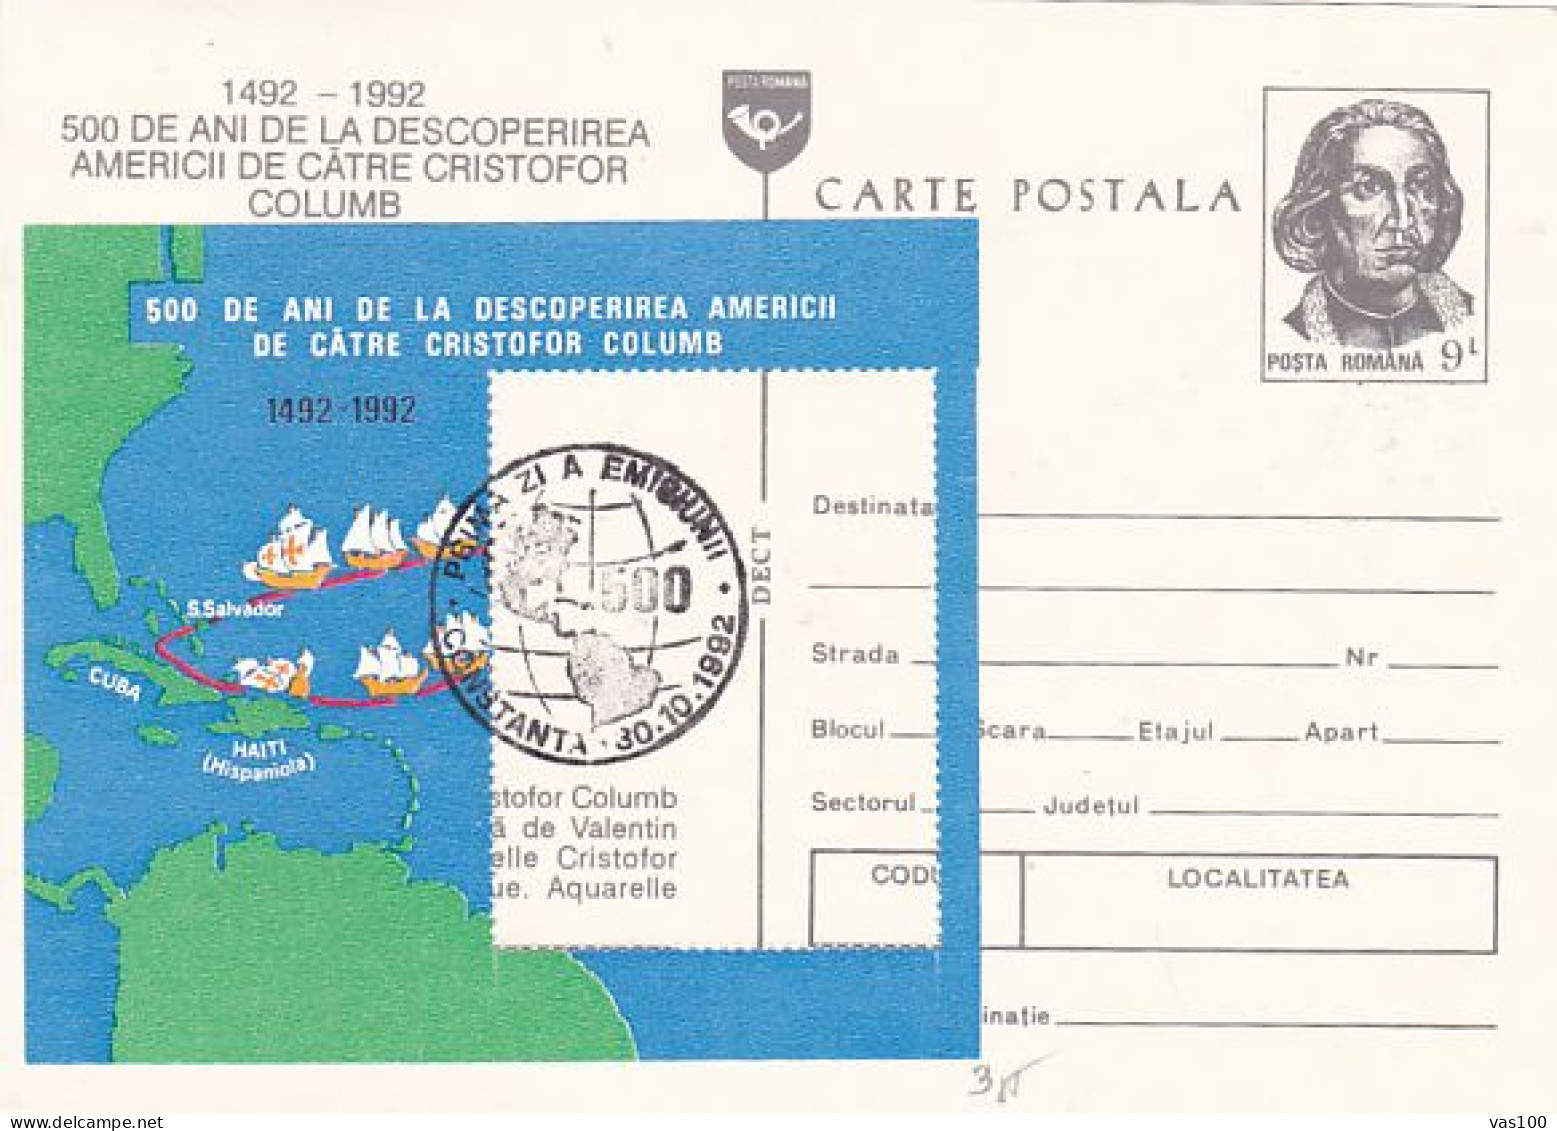 FAMOUS PEOPLE, CRISTOPHER COLUMBUS, DISCOVERY OF AMERICA, SHIP, CM, MAXICARD, CARTES MAXIMUM, OBLIT FDC, 1992, ROMANIA - Christopher Columbus